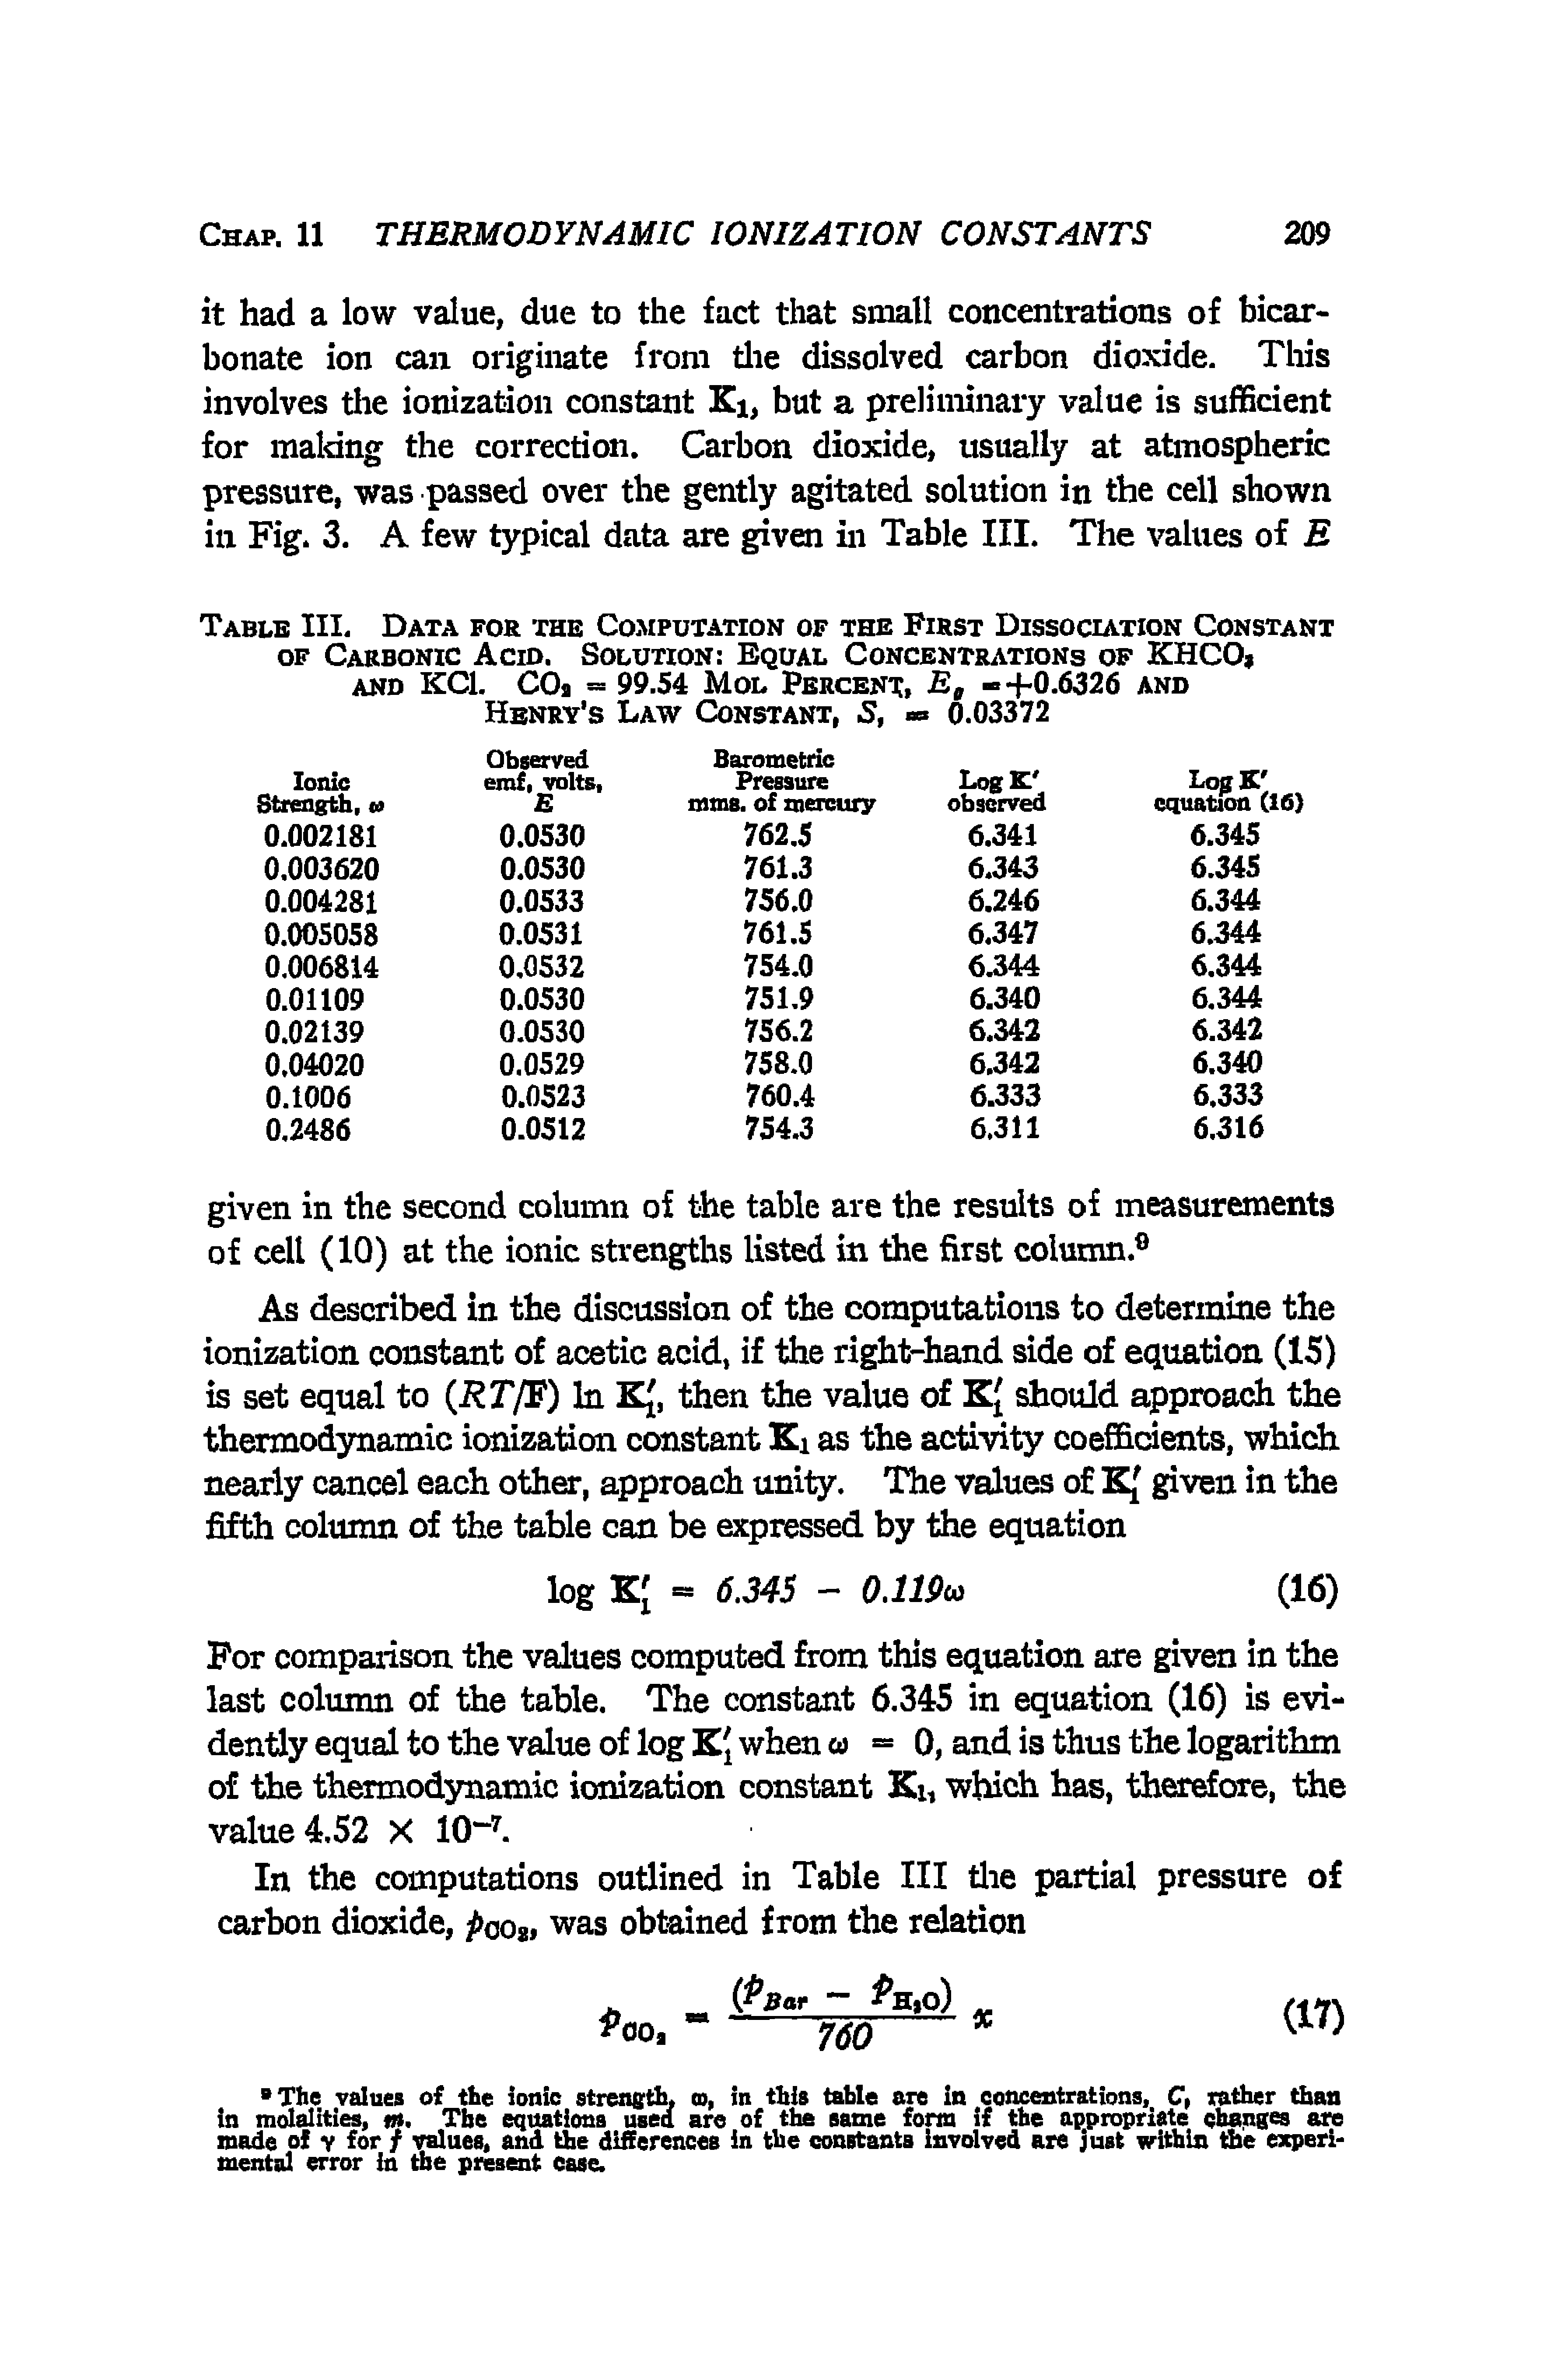 Table III. Data for the Computation of the First Dissociation Constant of Carbonic Acid. Solution Equal Concentrations of KHCO,...